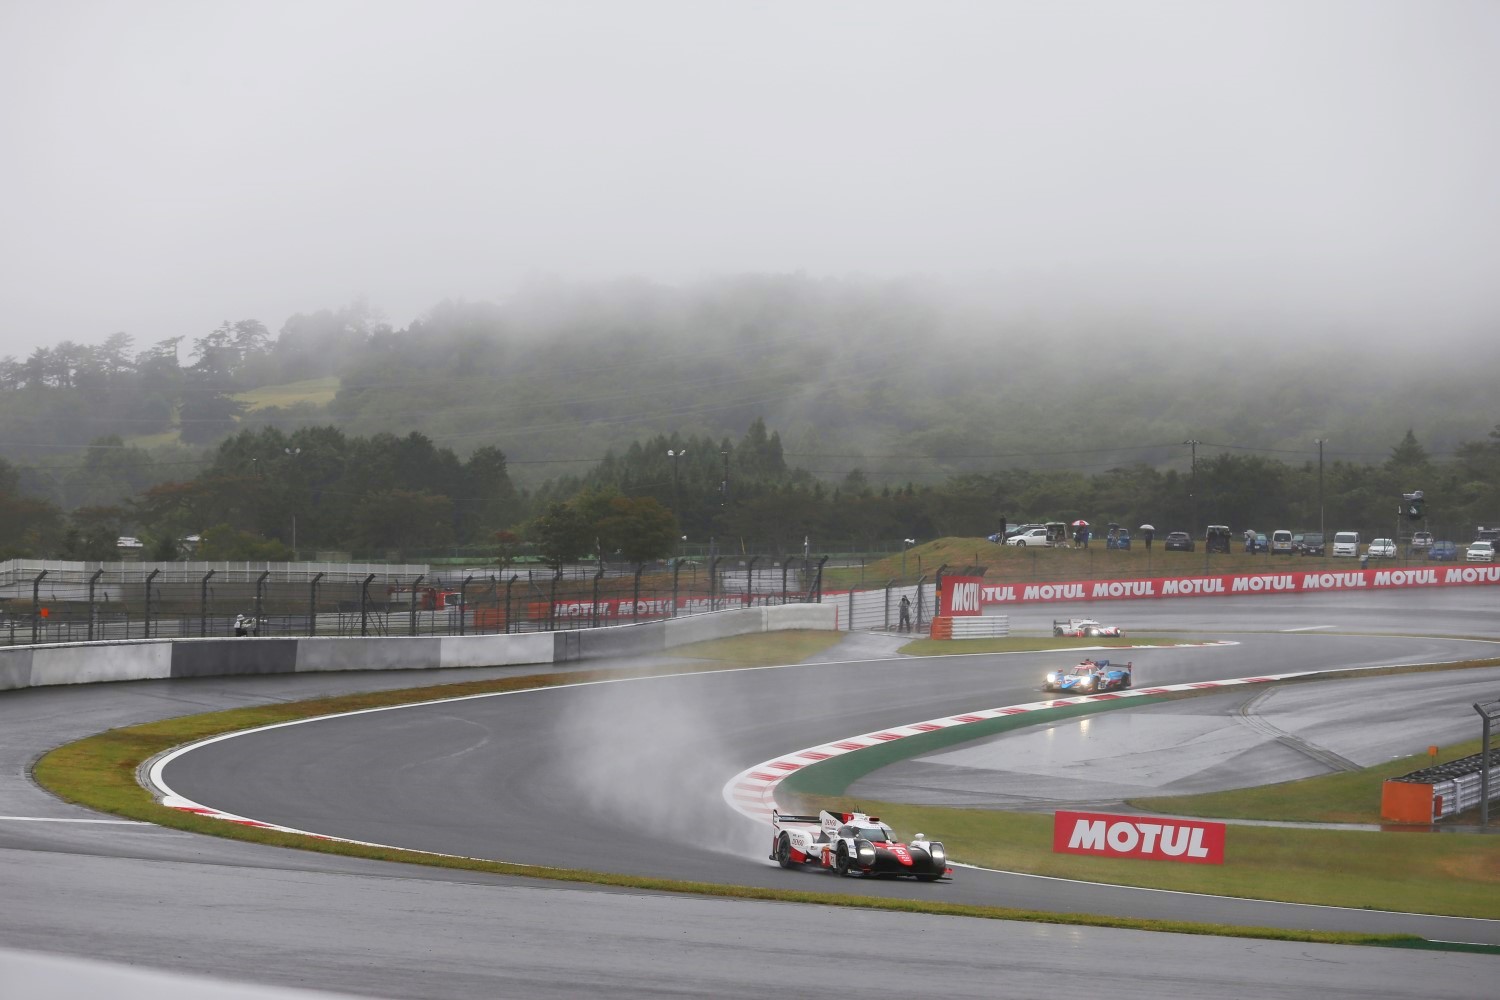 The Fuji race will have a bigger attendance with Alonso